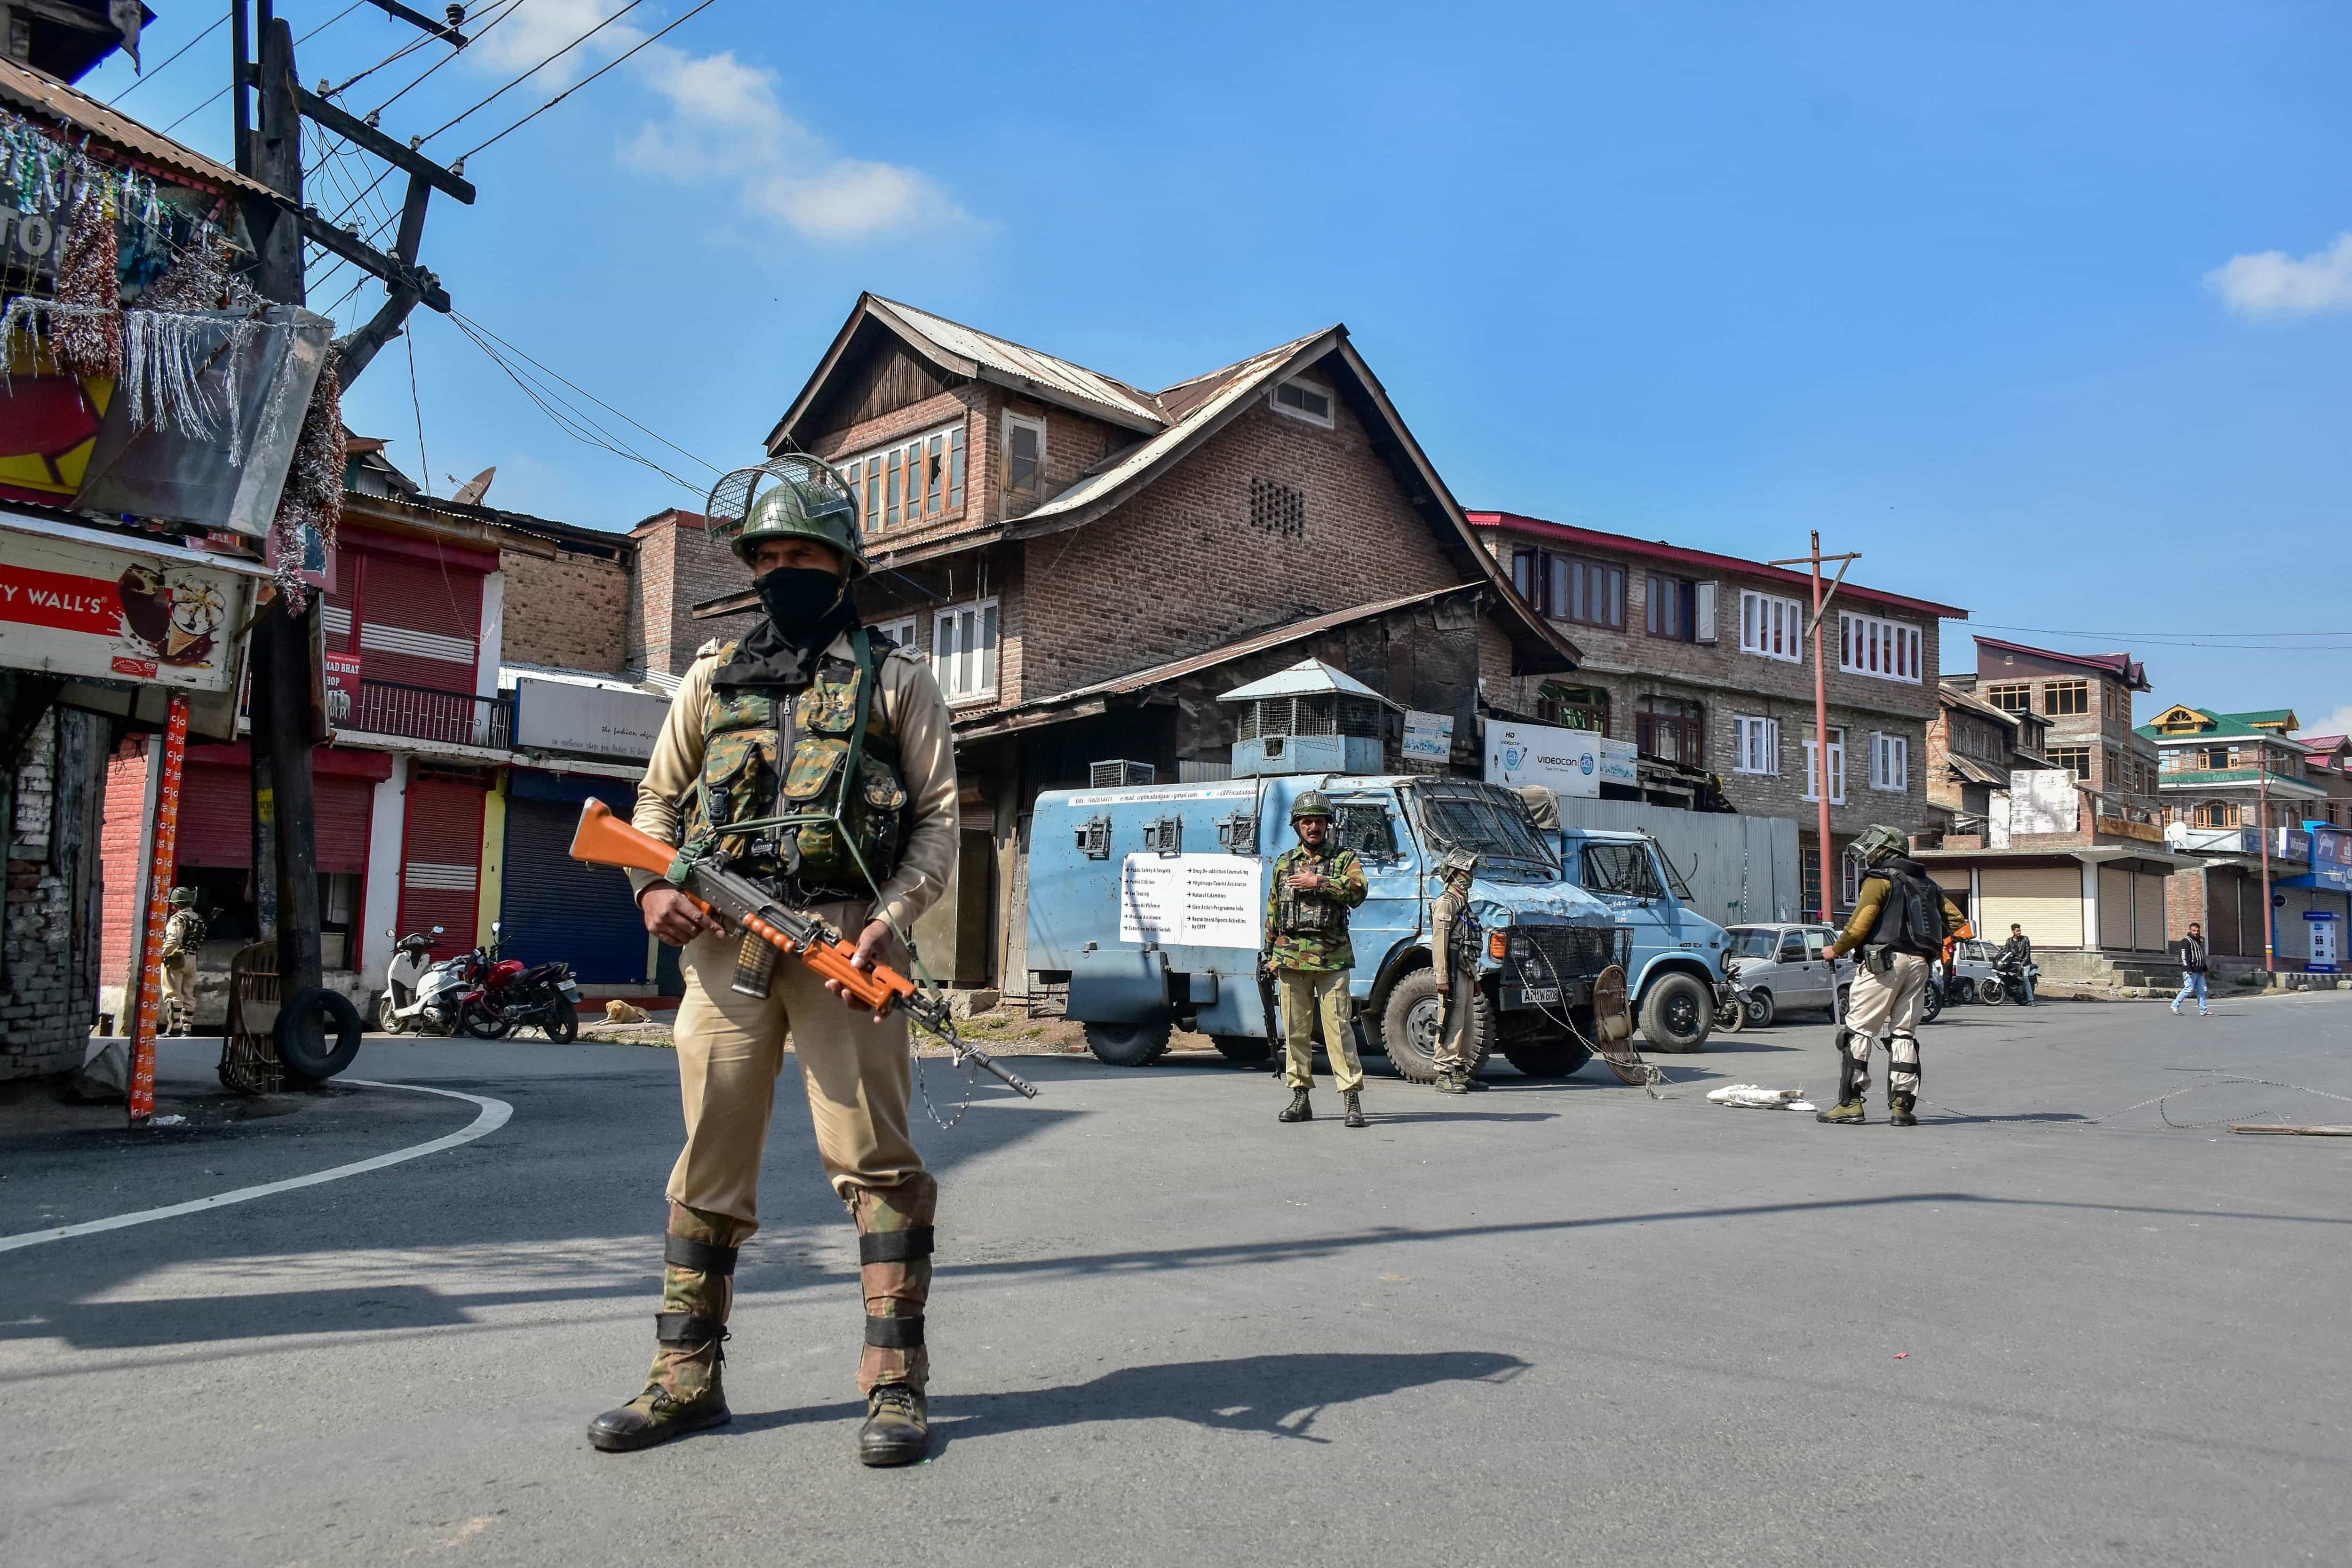 Indian paramilitary troopers stand guard during restrictions in Srinagar, Indian administered Kashmir, 11 October 2018, Saqib Majeed/SOPA Images/LightRocket via Getty Images